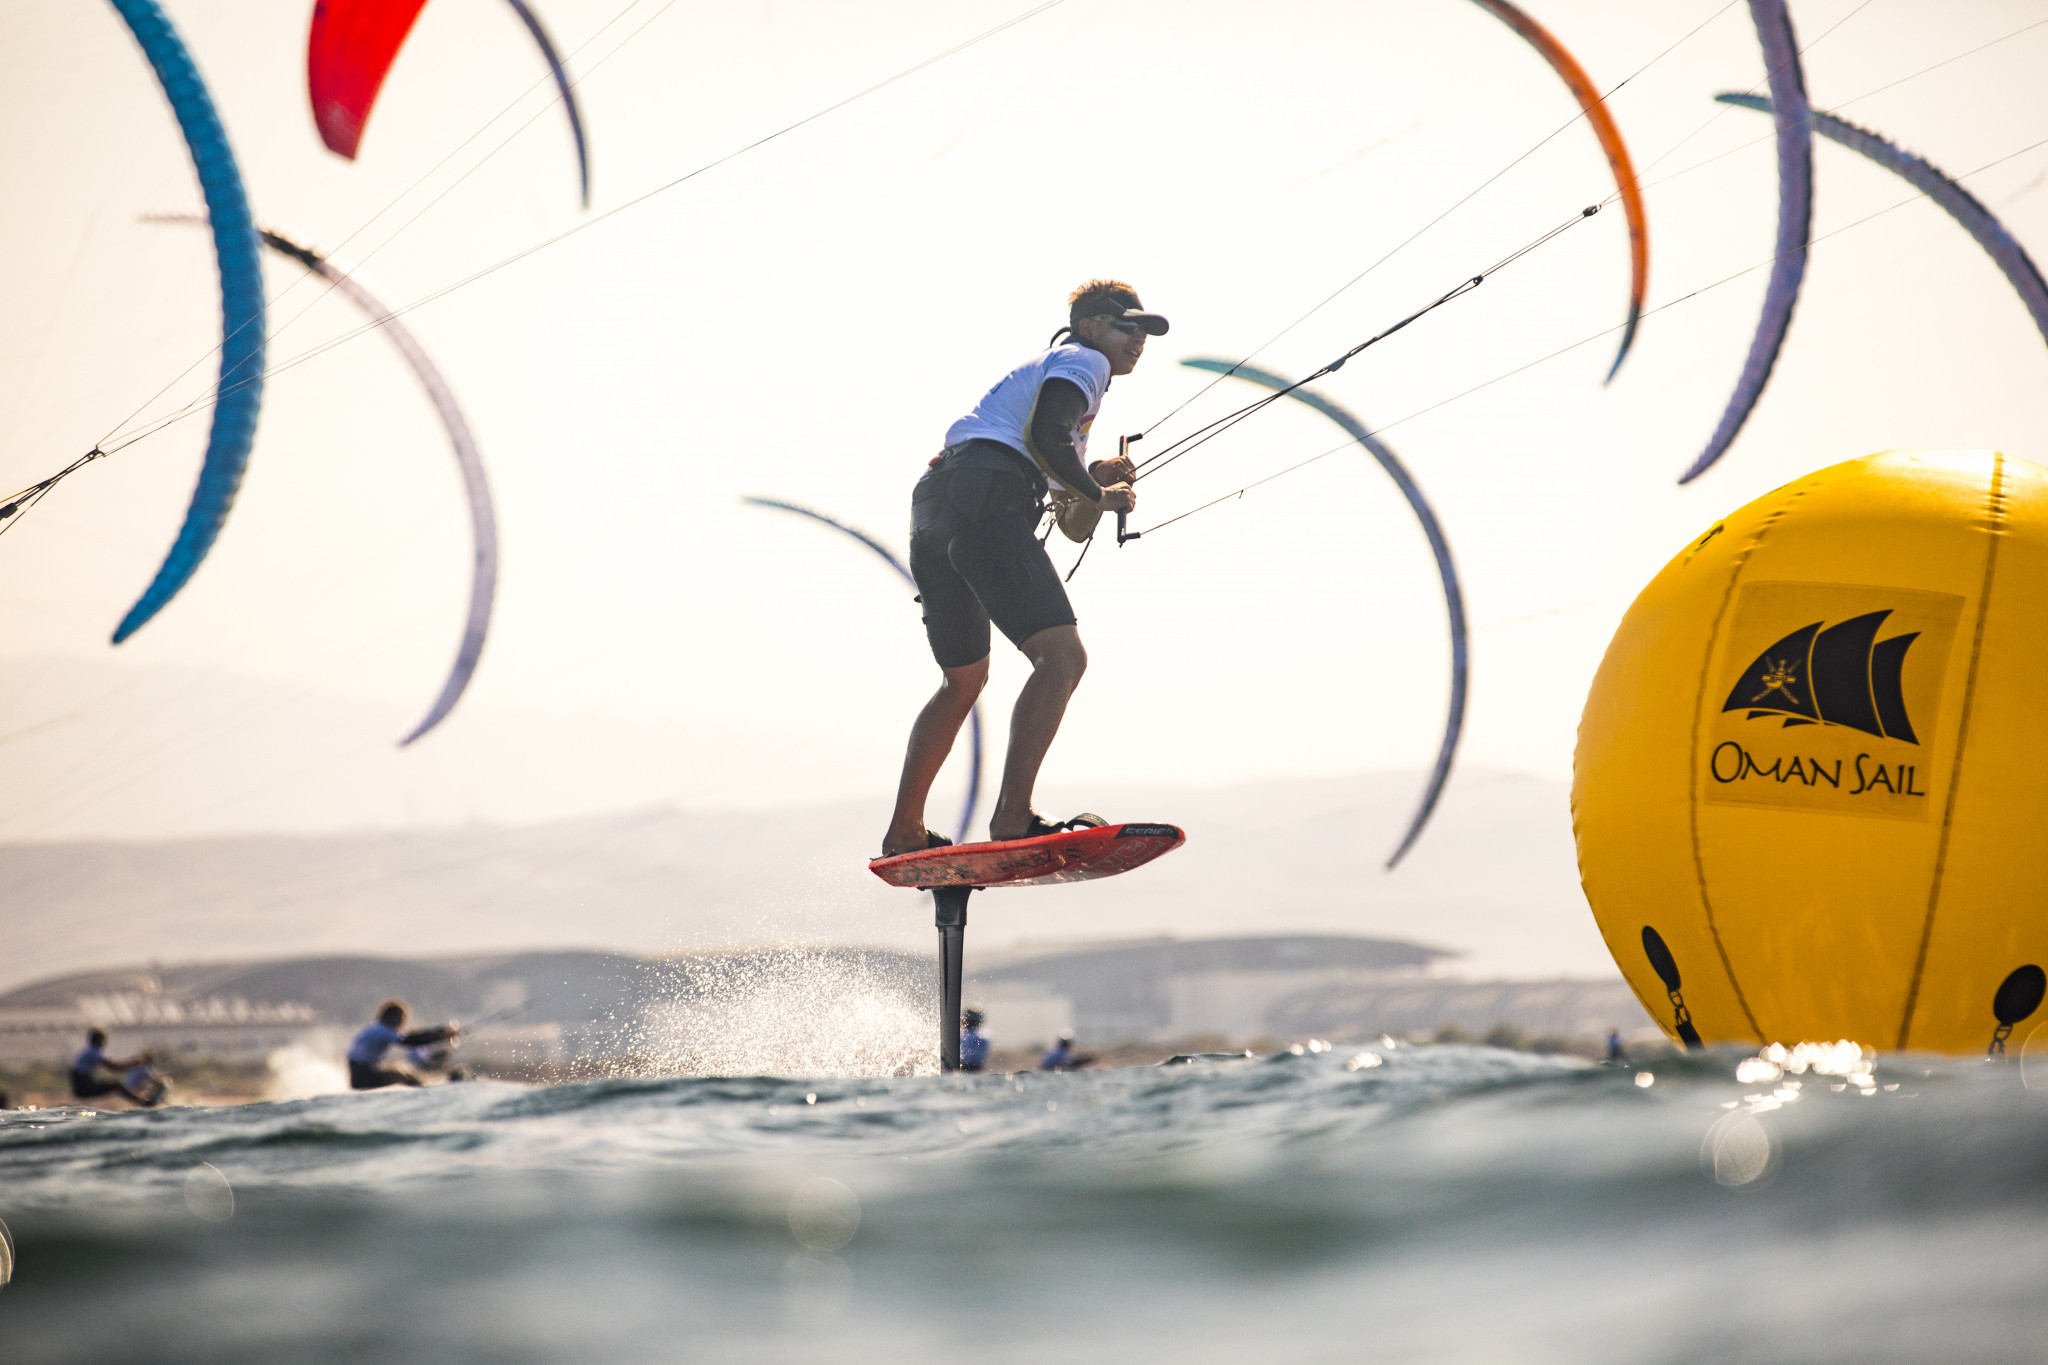 Frontrunners extend leads at IKA Formula Kite World Championships despite competition from chasing pack